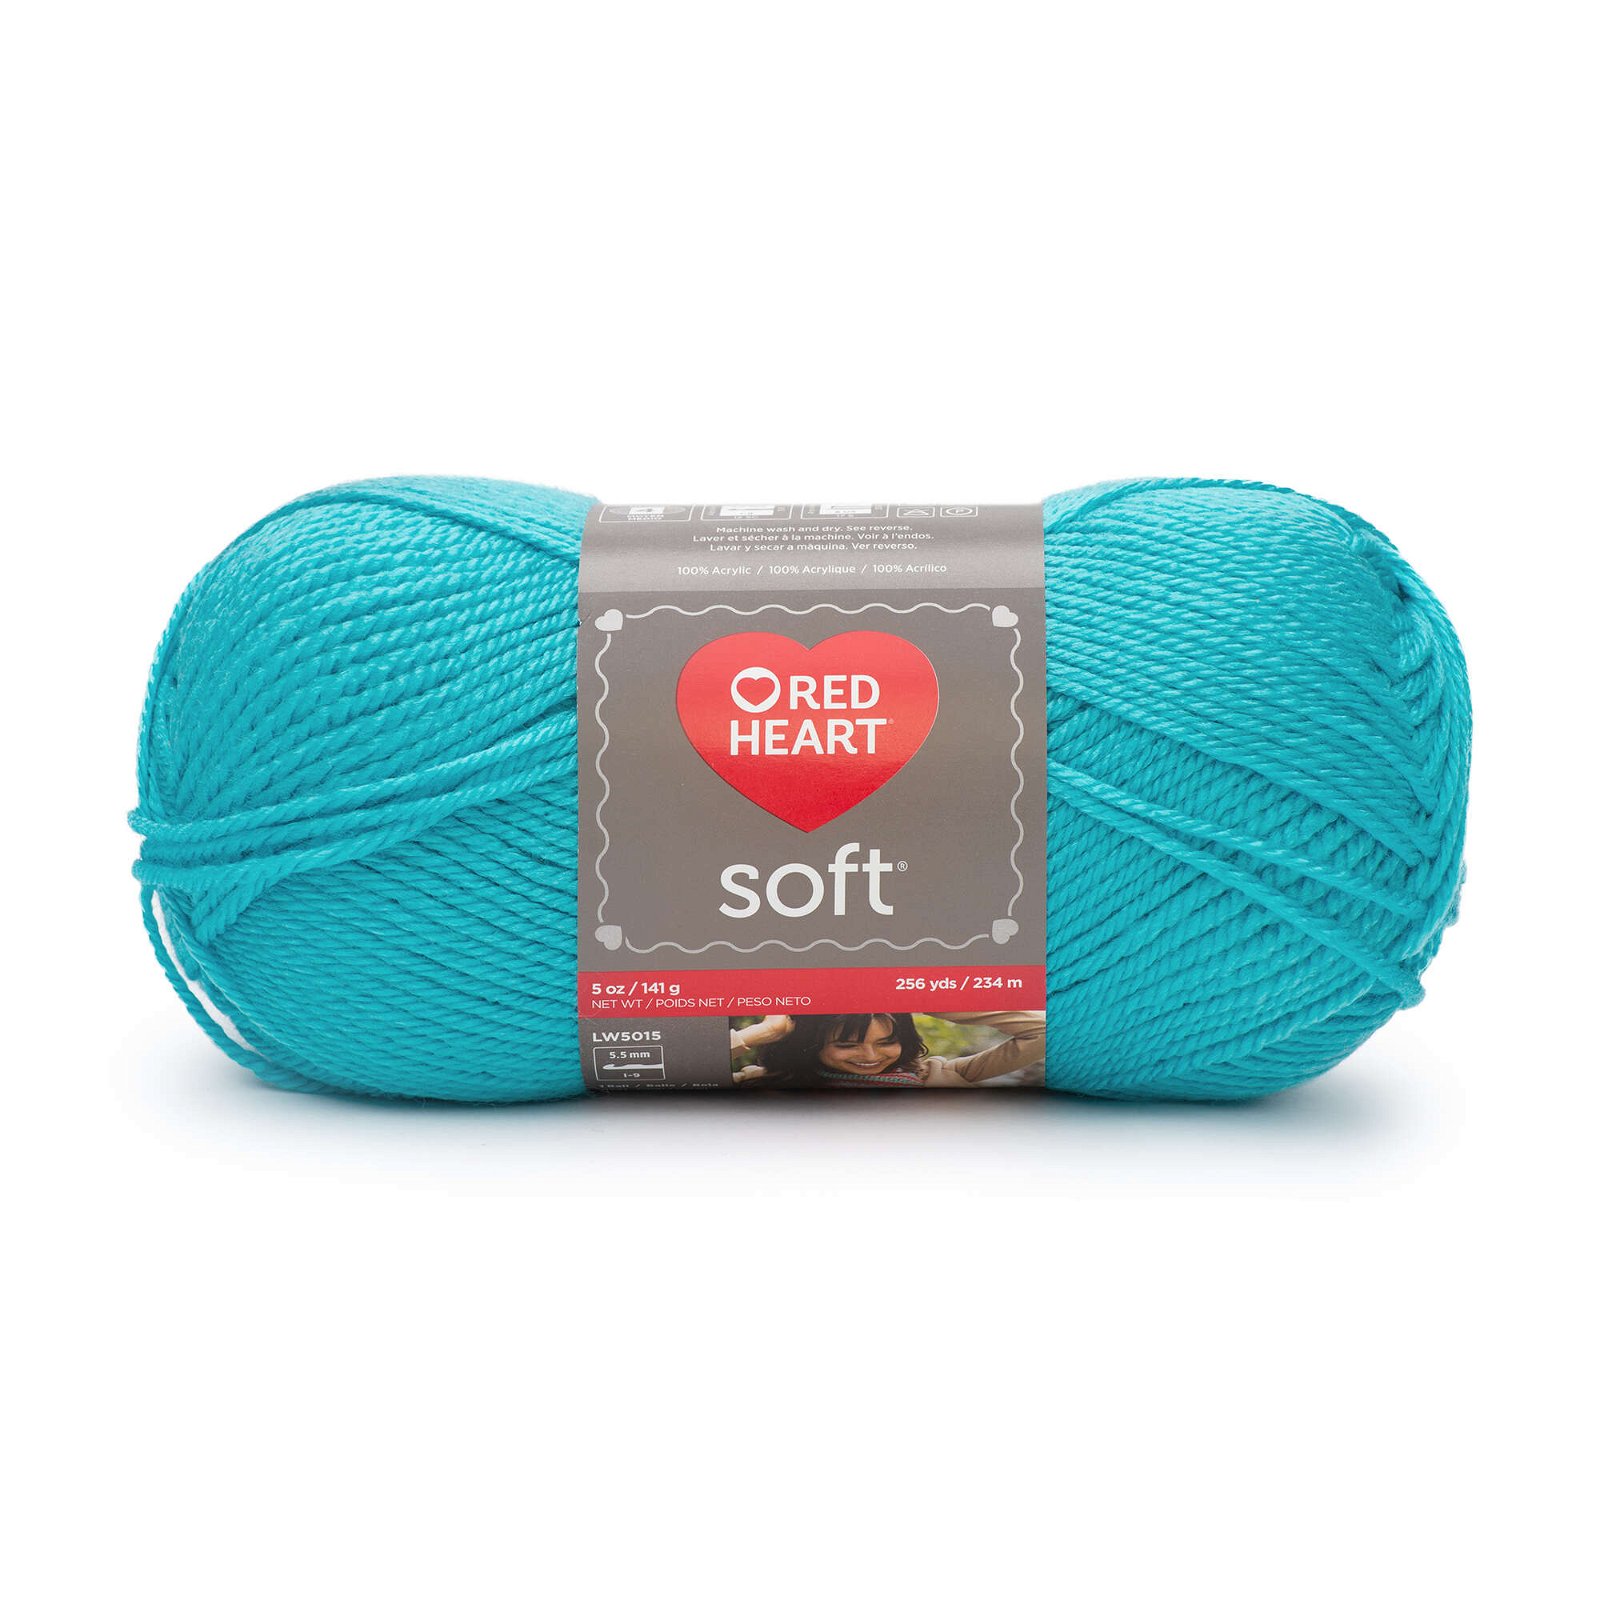 Red Heart Soft Yarn, Turquoise